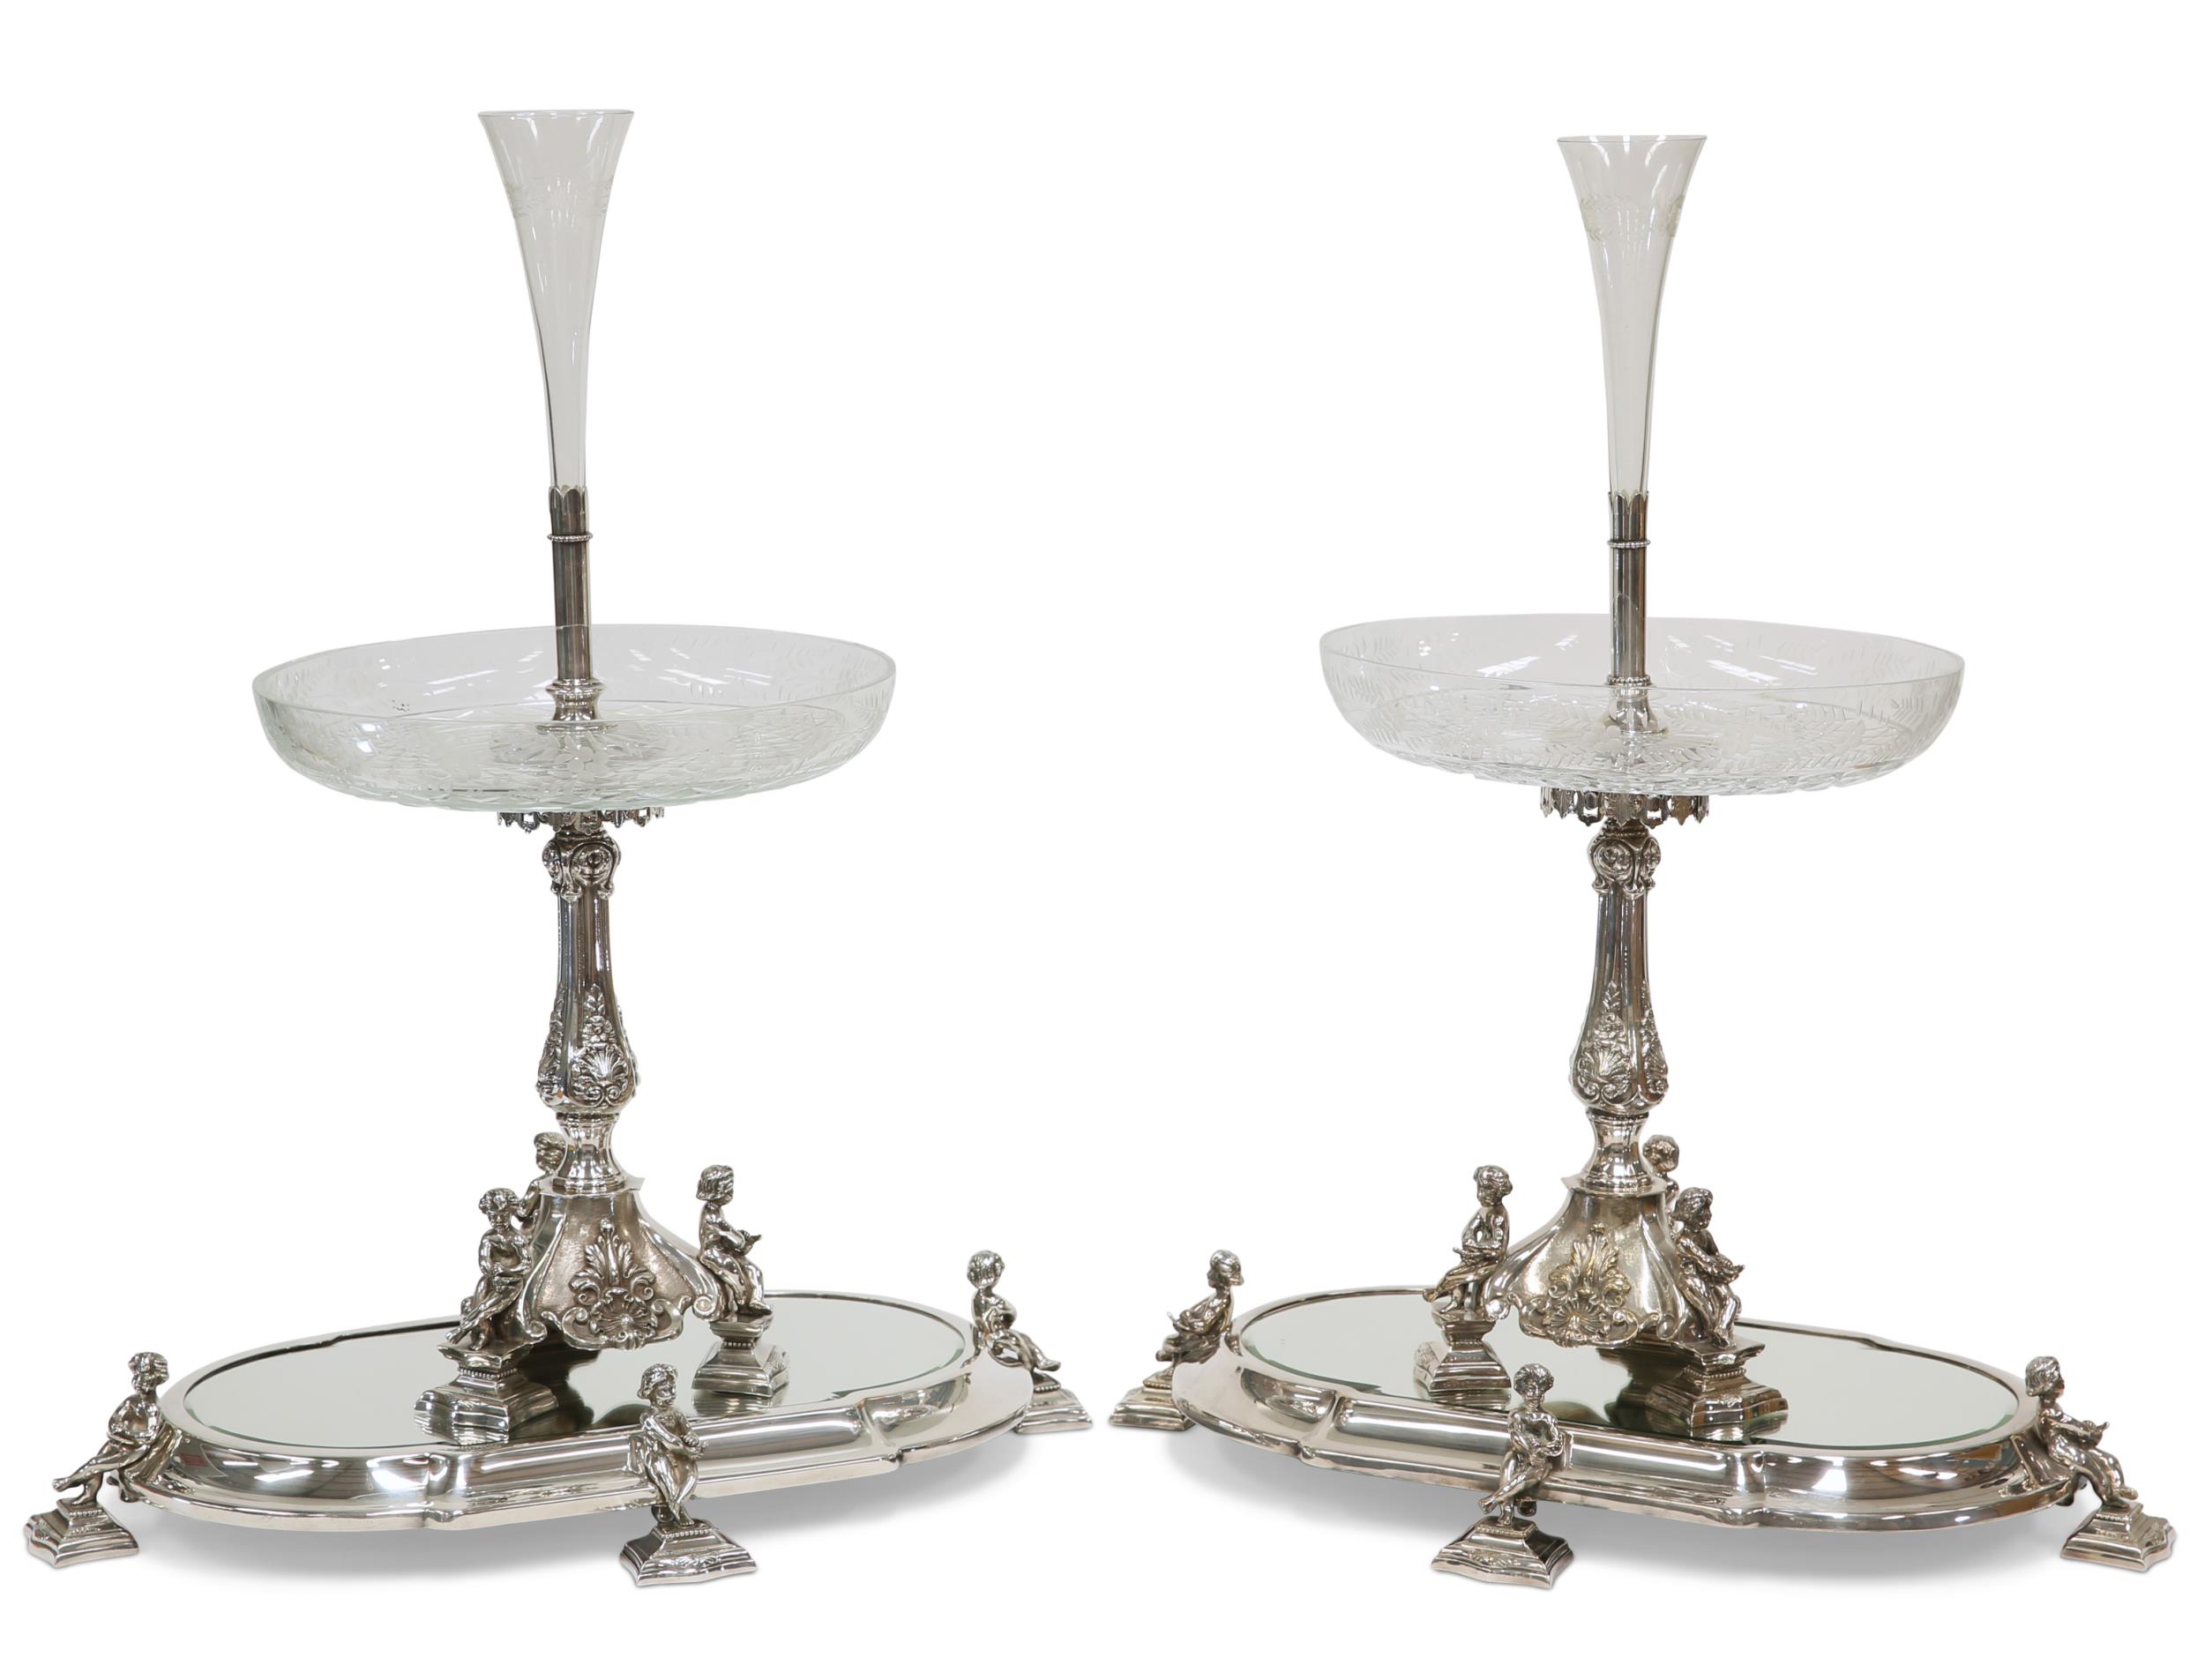 A HANDSOME PAIR OF 19TH CENTURY SILVER-PLATED CENTREPIECES ON MIRRORED STANDS - Image 2 of 16